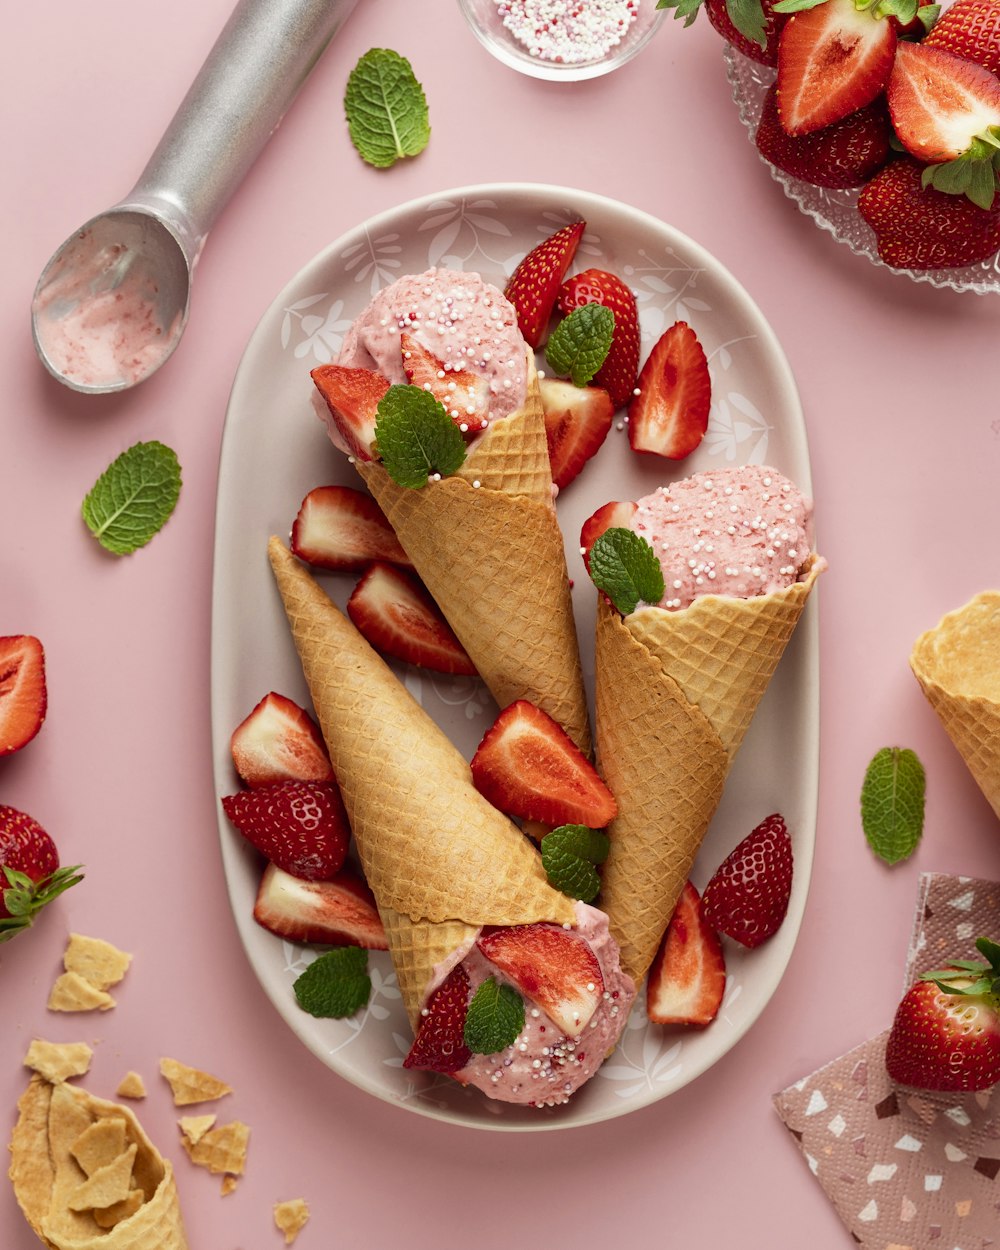 three cones of ice cream with strawberries on a plate